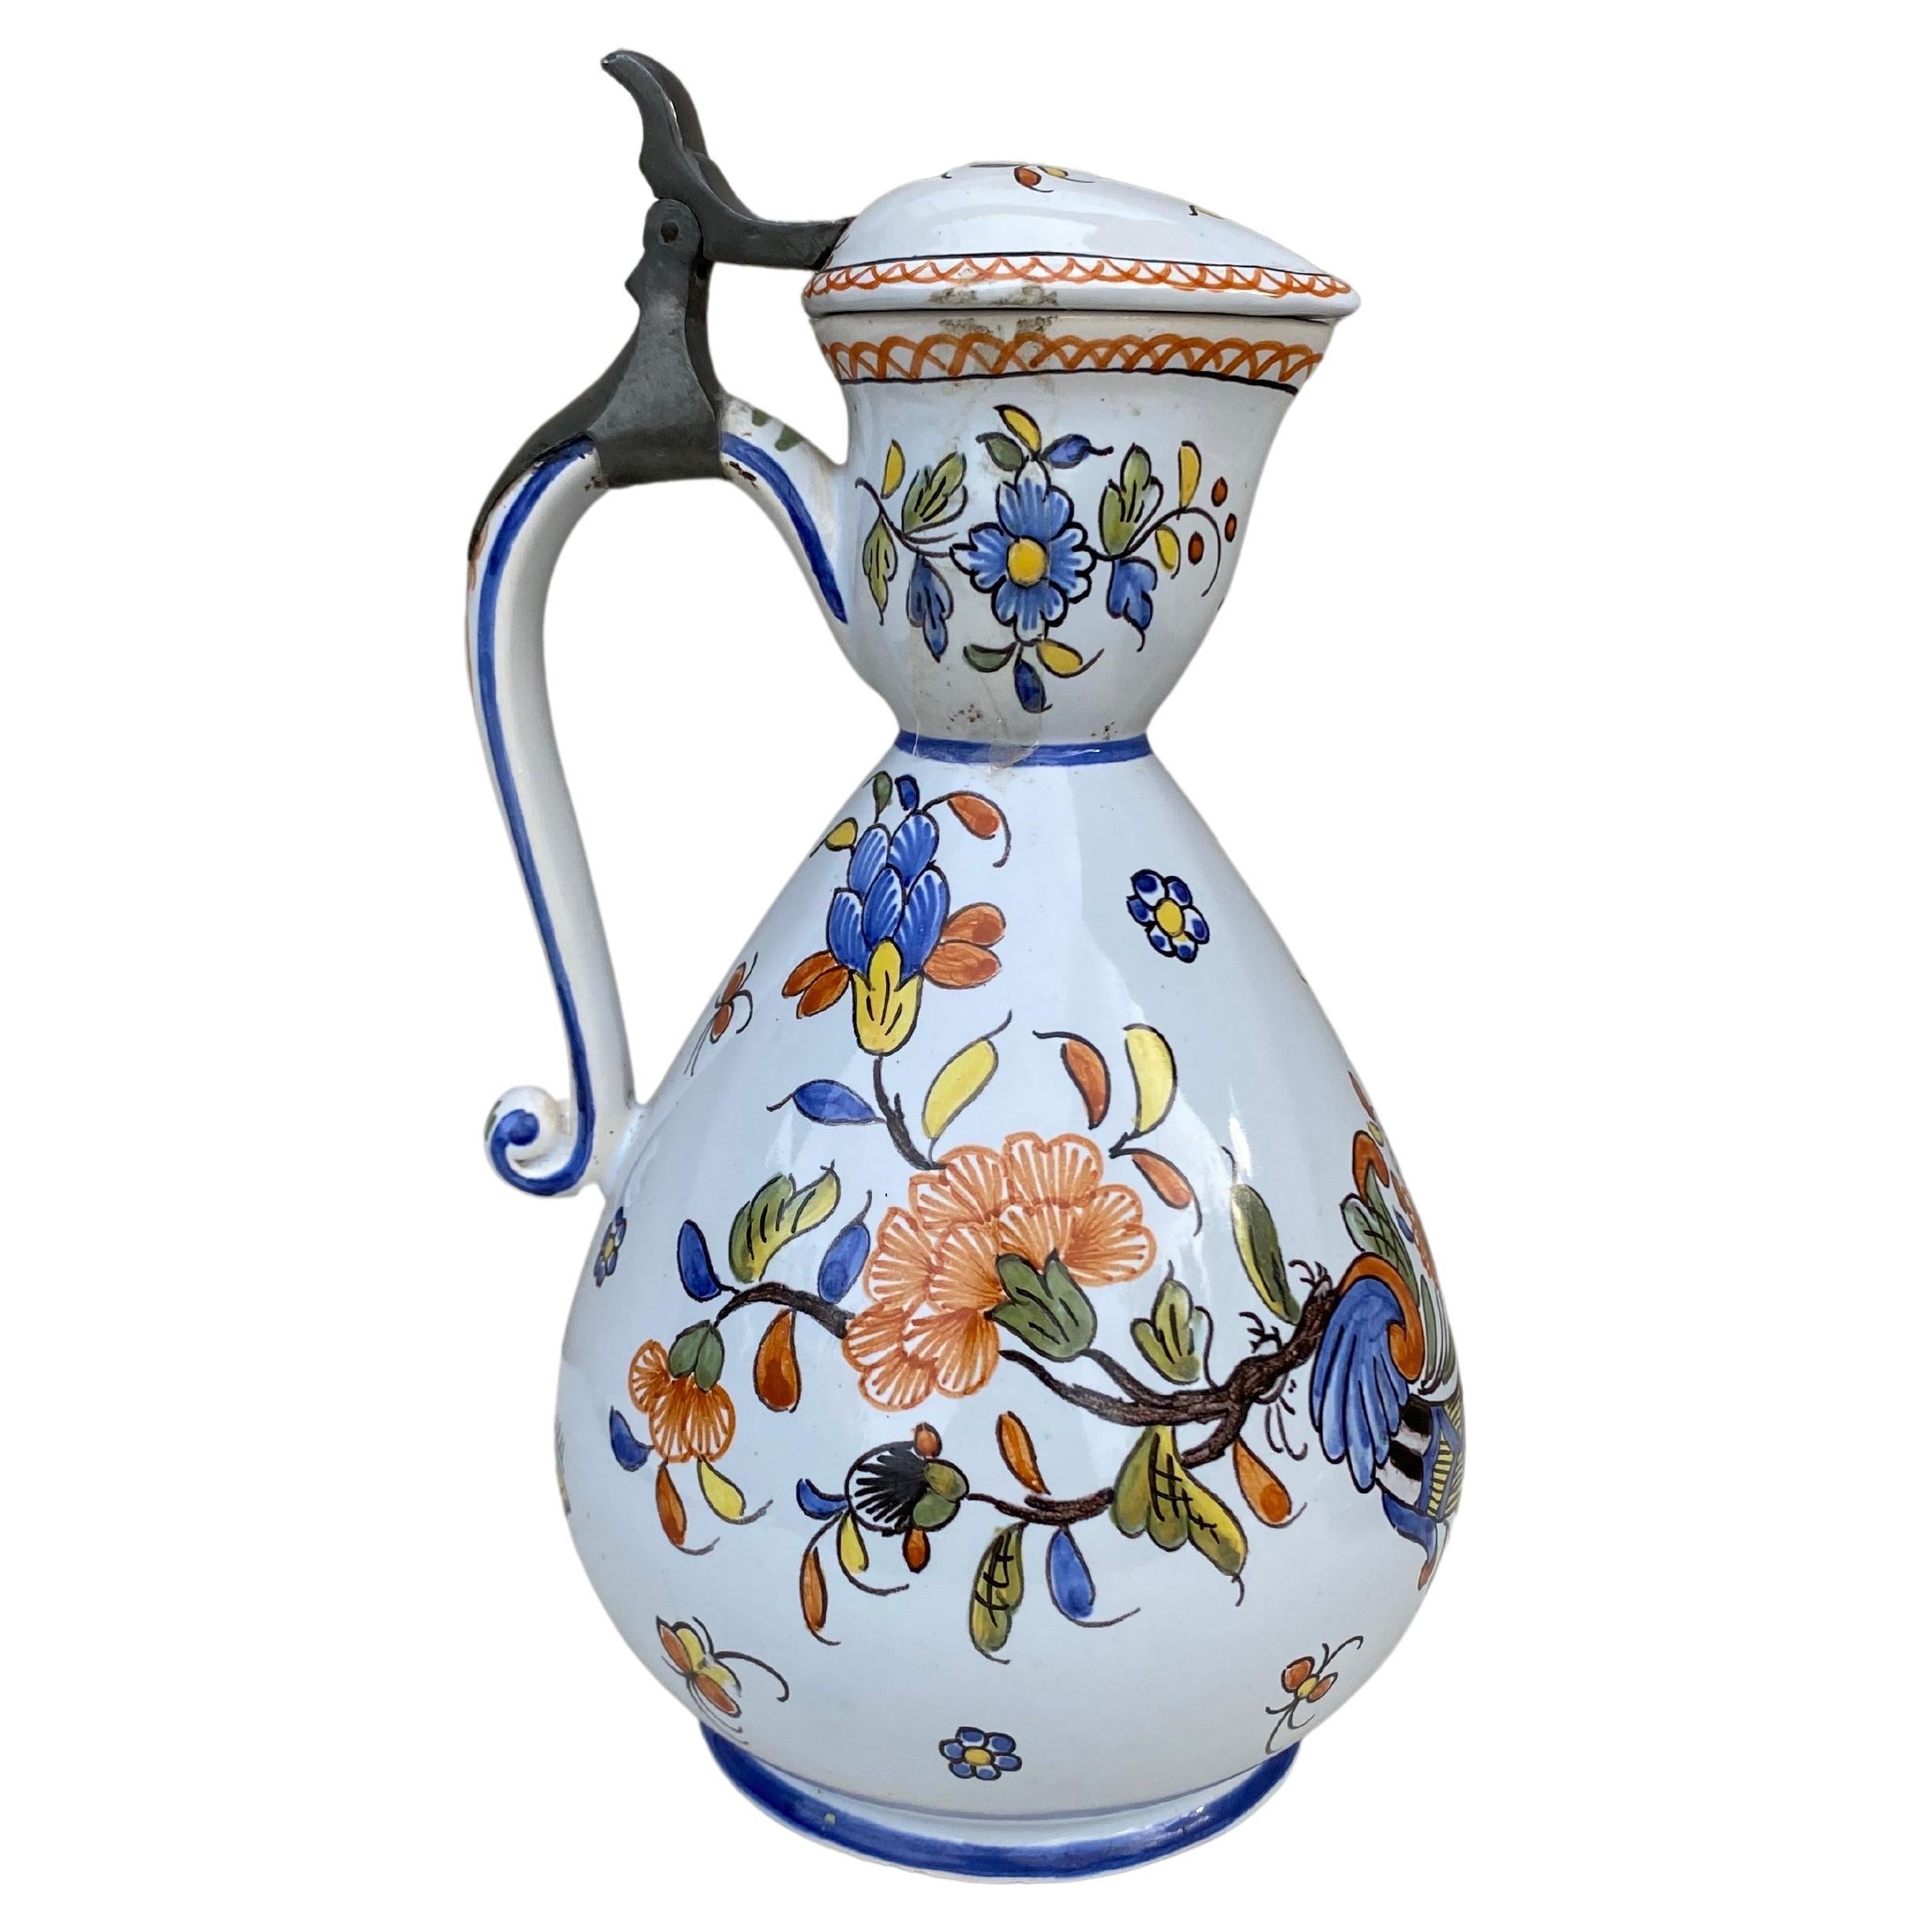 Rare French Faience Pitcher with Lid Rouen Style, Circa 1900